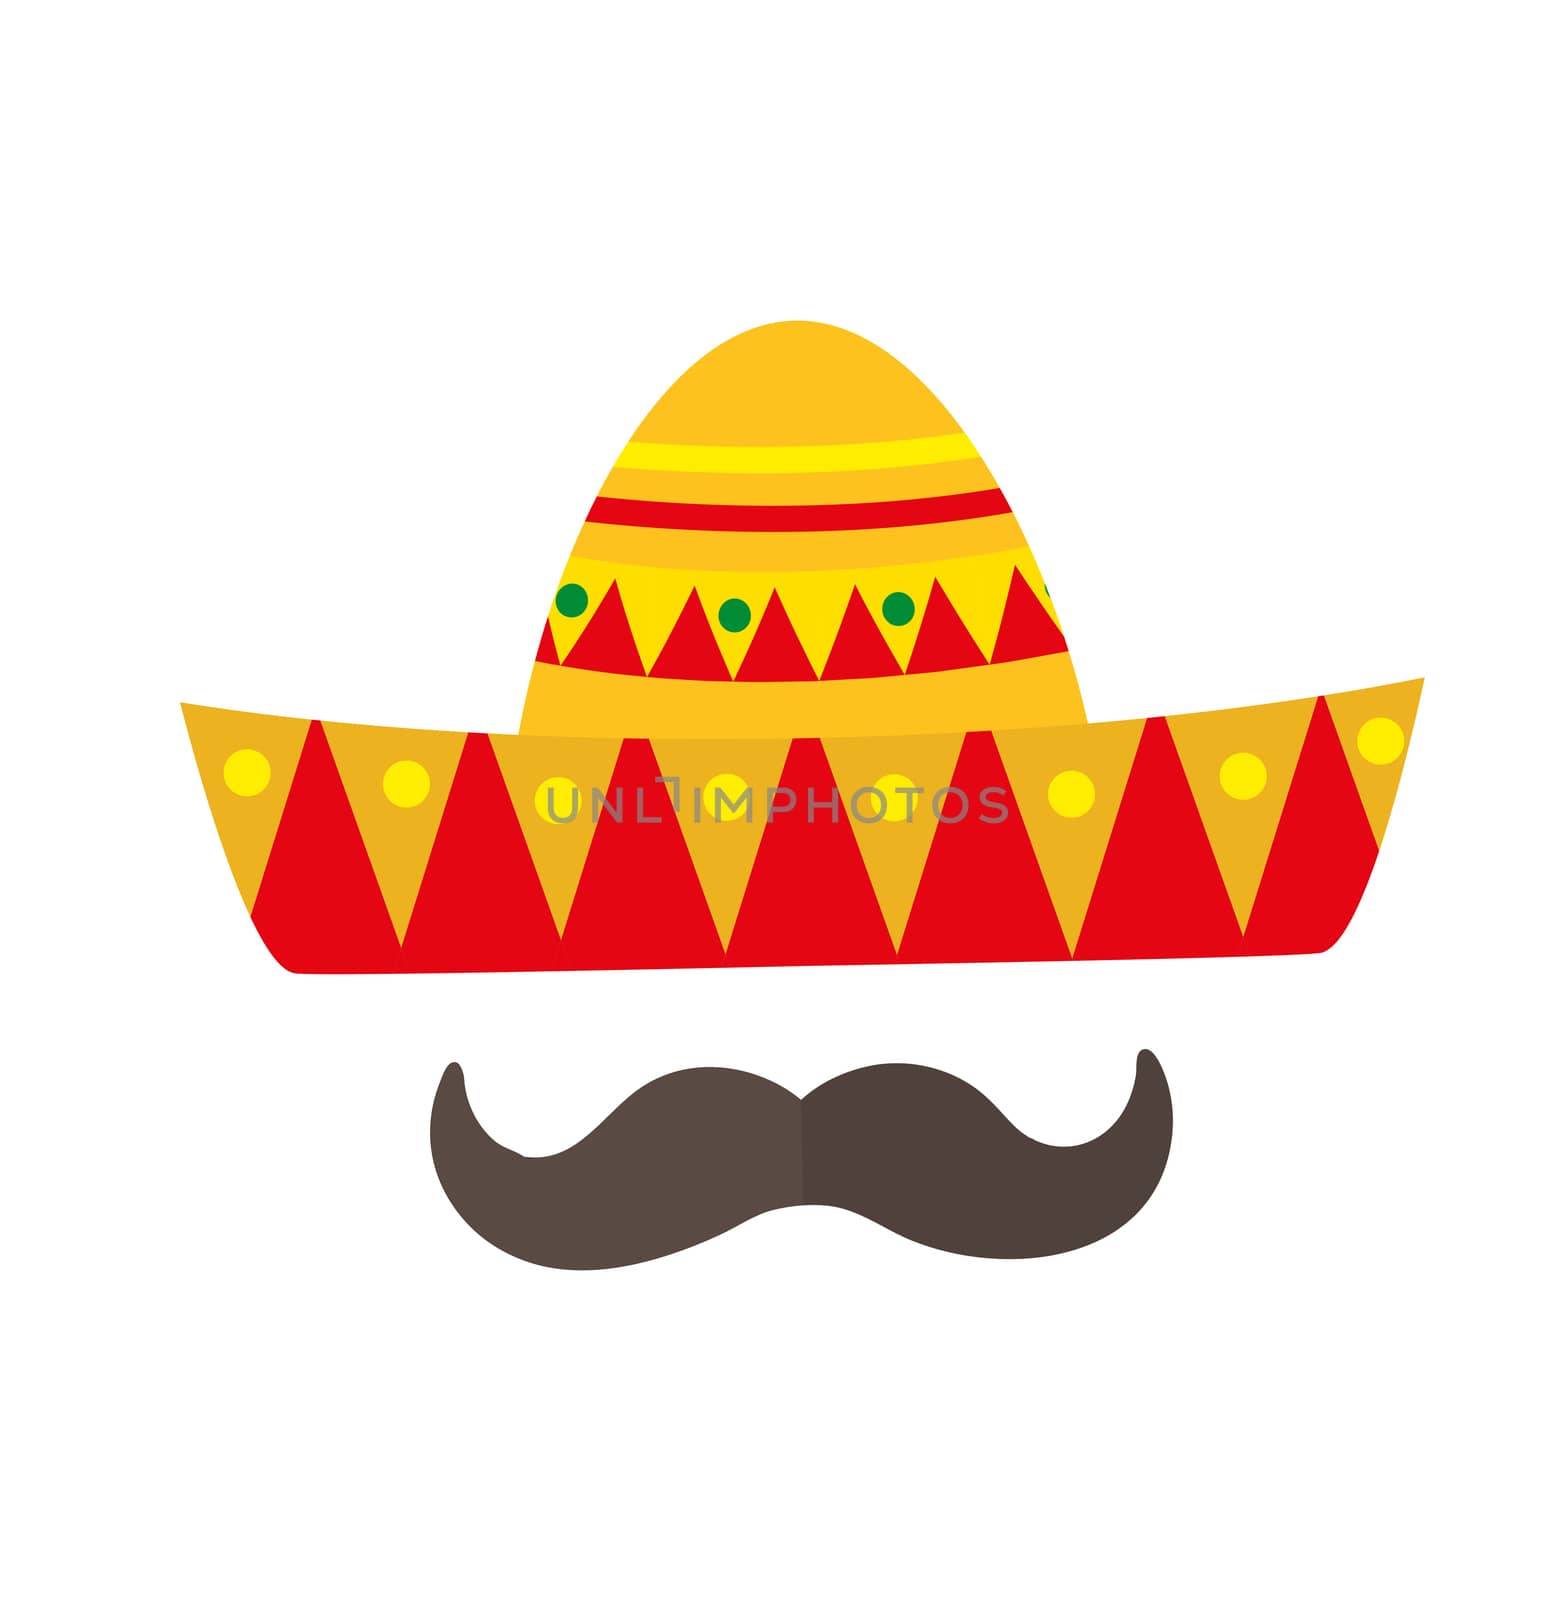 Sombrero icon, flat style. Mexican traditional clothing. Isolated on white background. illustration, clip-art